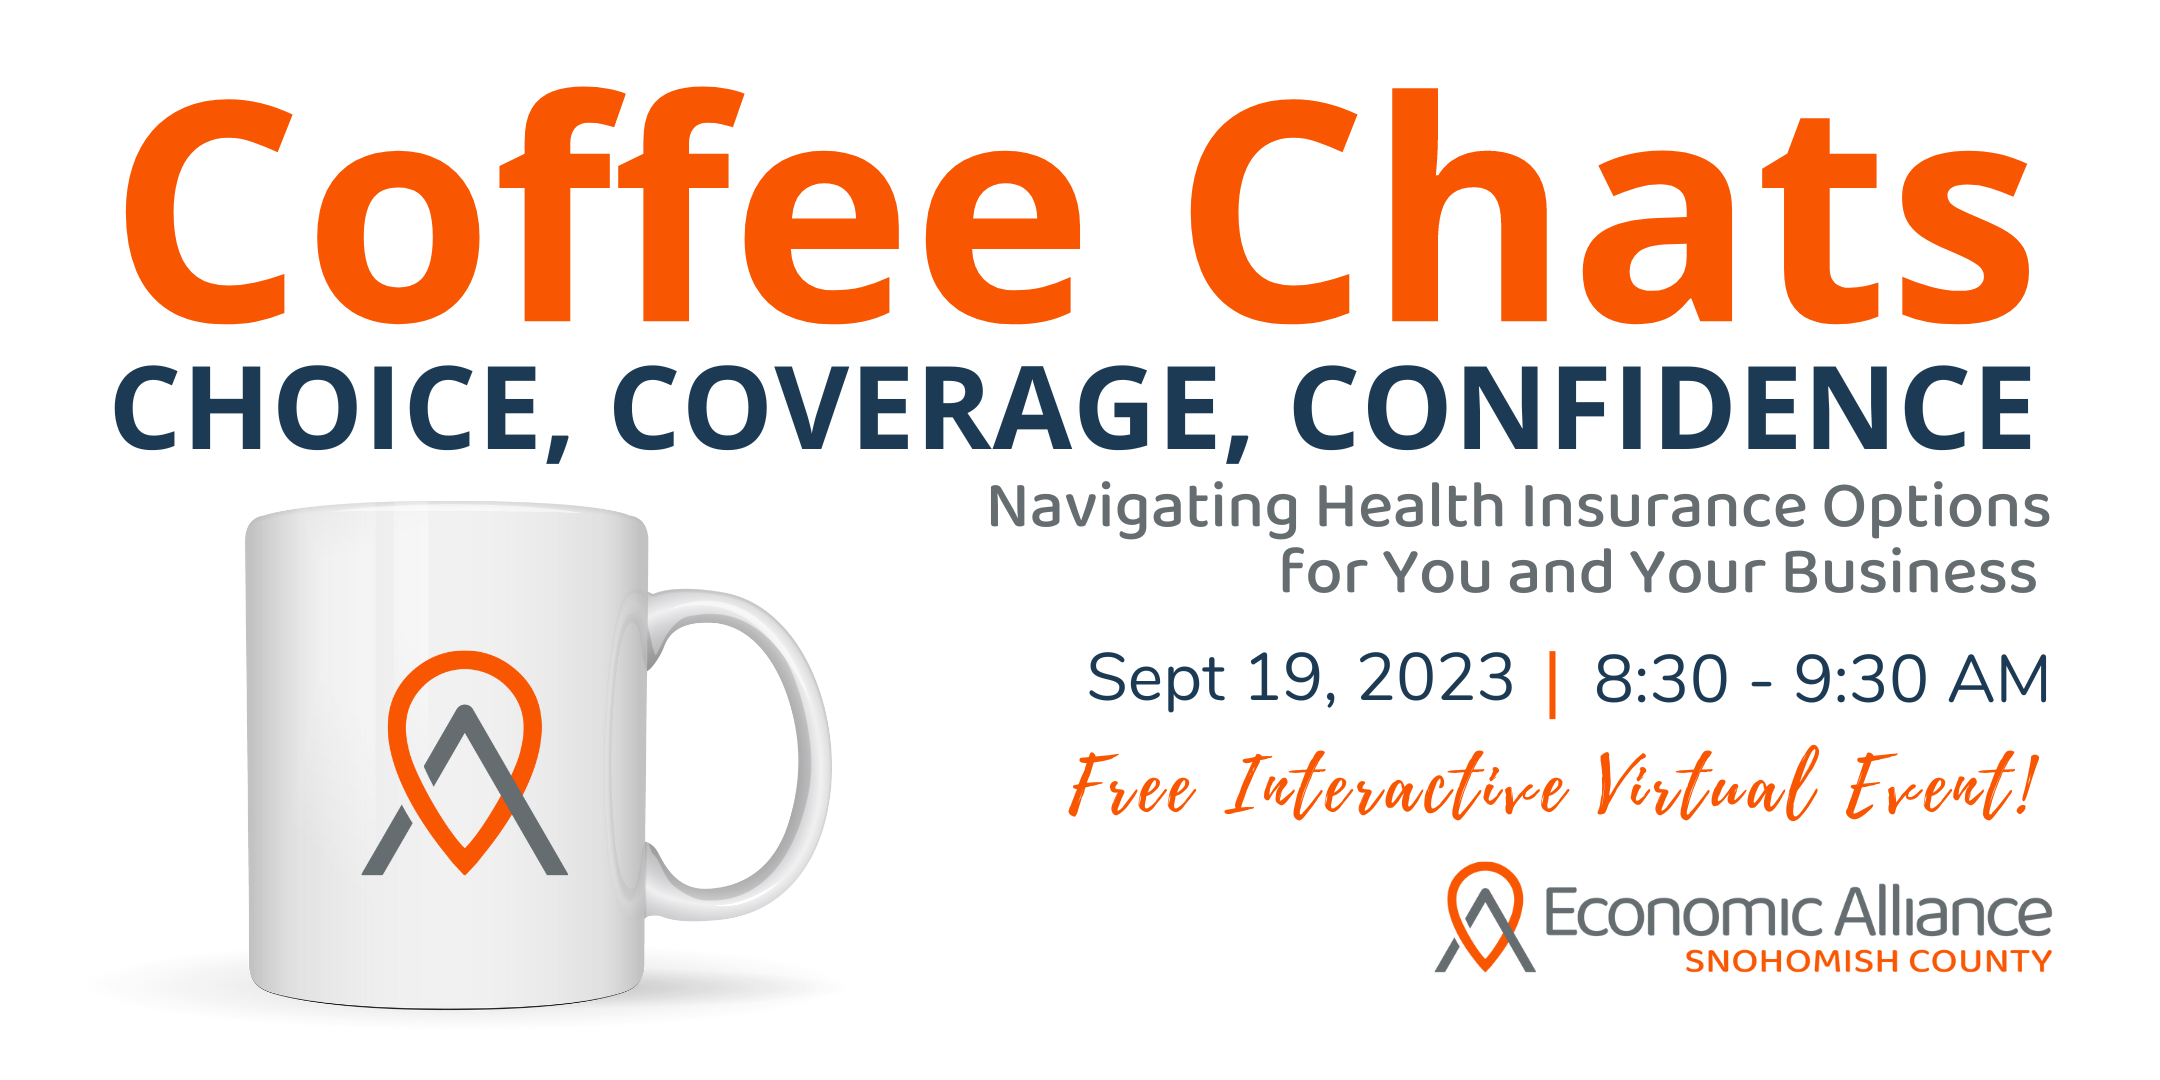 Event Promo Photo For Coffee Chats - Choice, Coverage, Confidence: Navigating Medical Insurance Options for You and Your Business